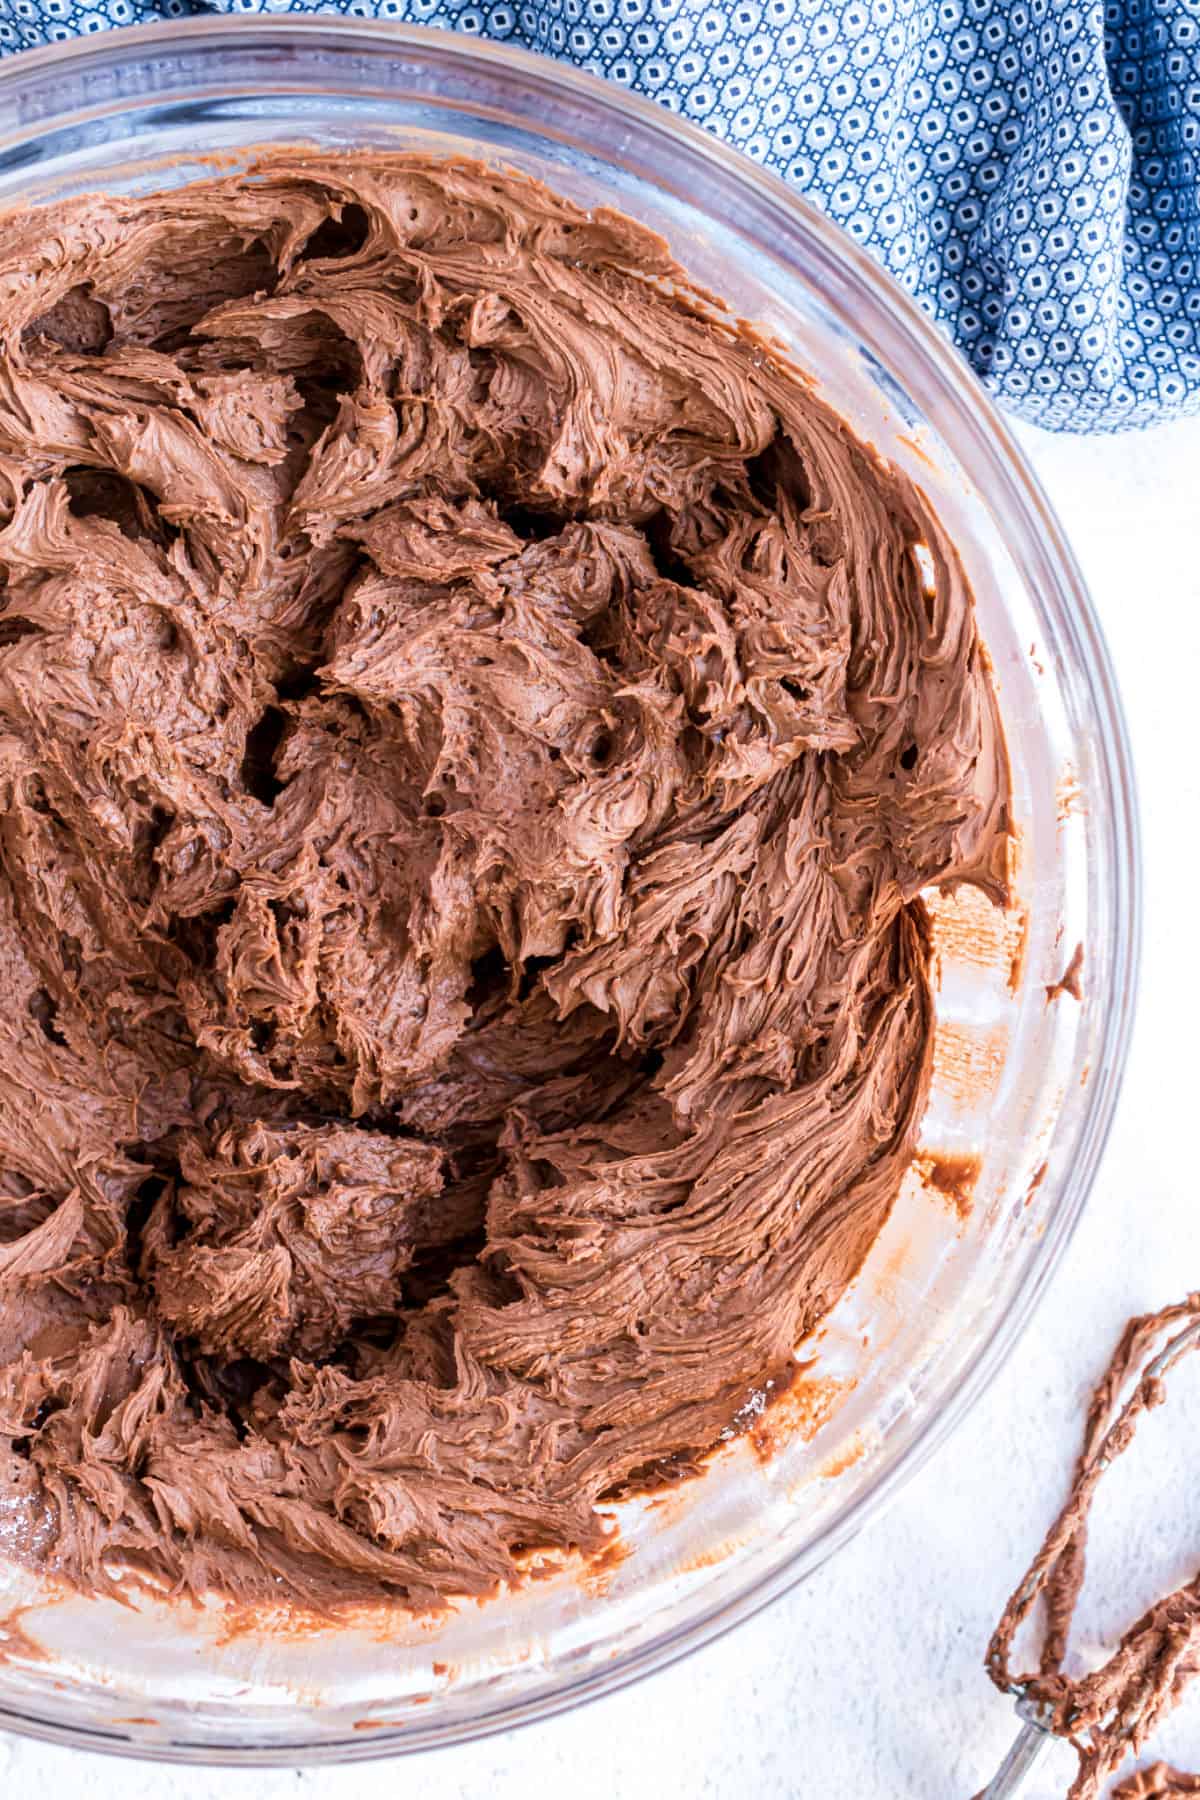 Chocolate buttercream frosting in a clear glass mixing bowl.